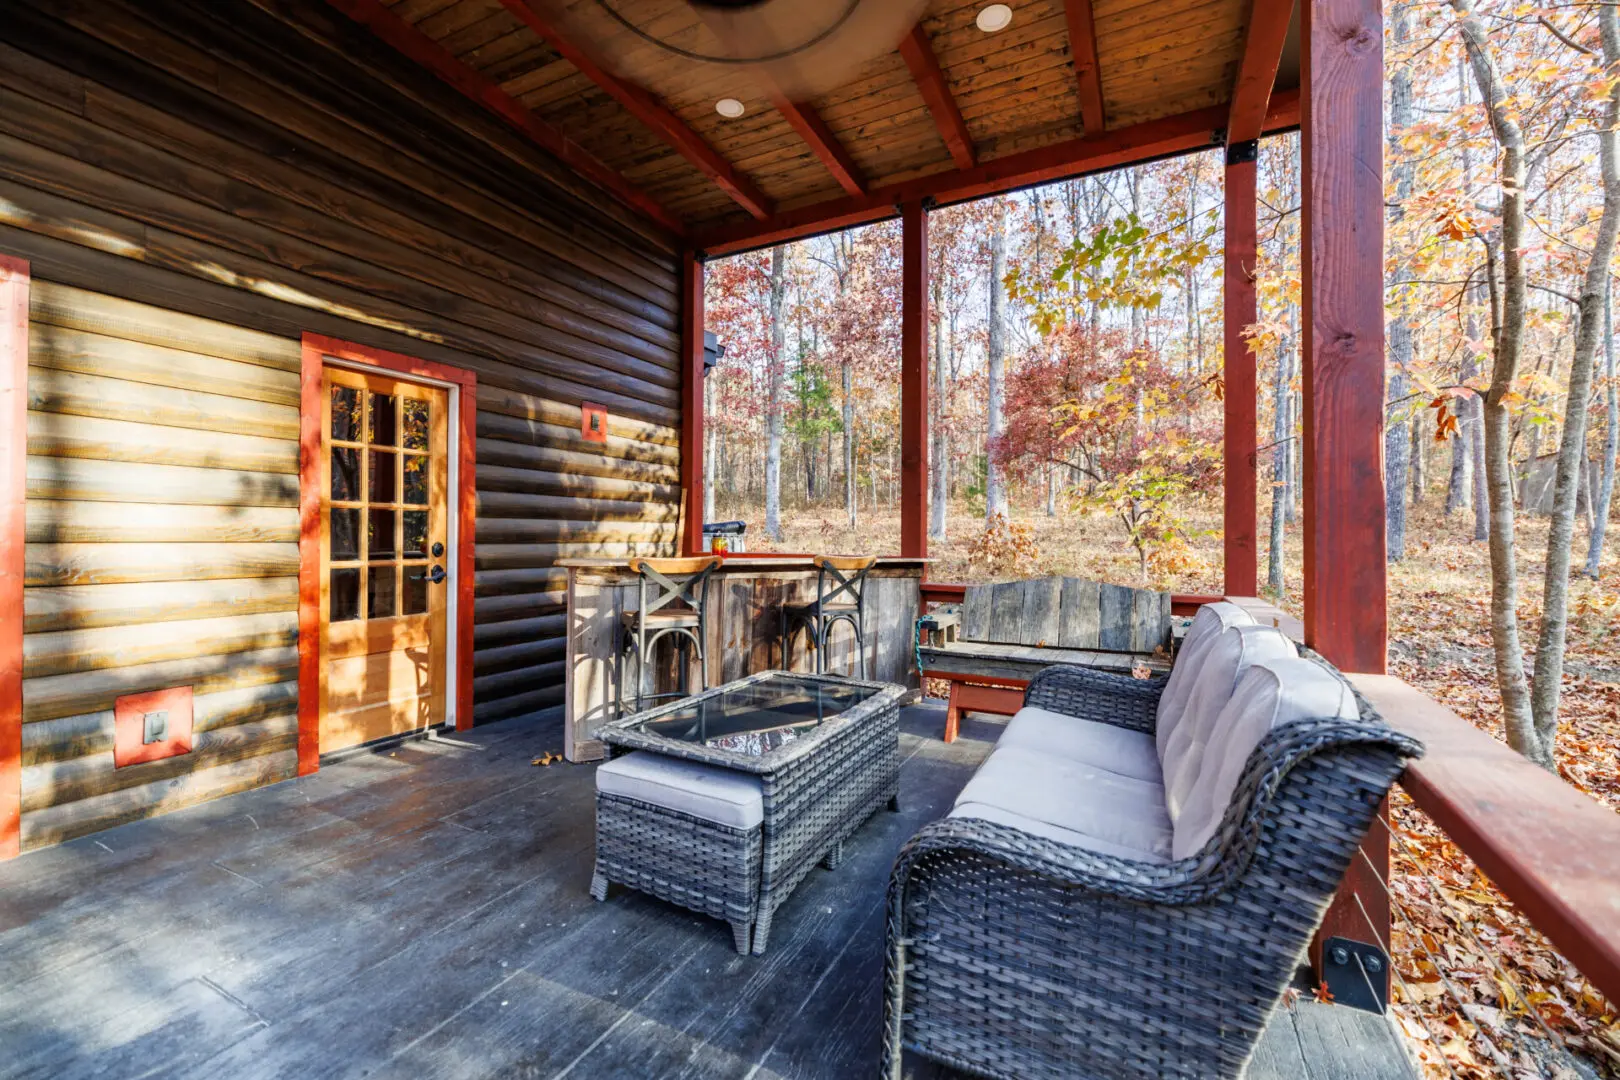 A Little River Point porch with wicker furniture and a fireplace, complete with a sauna.